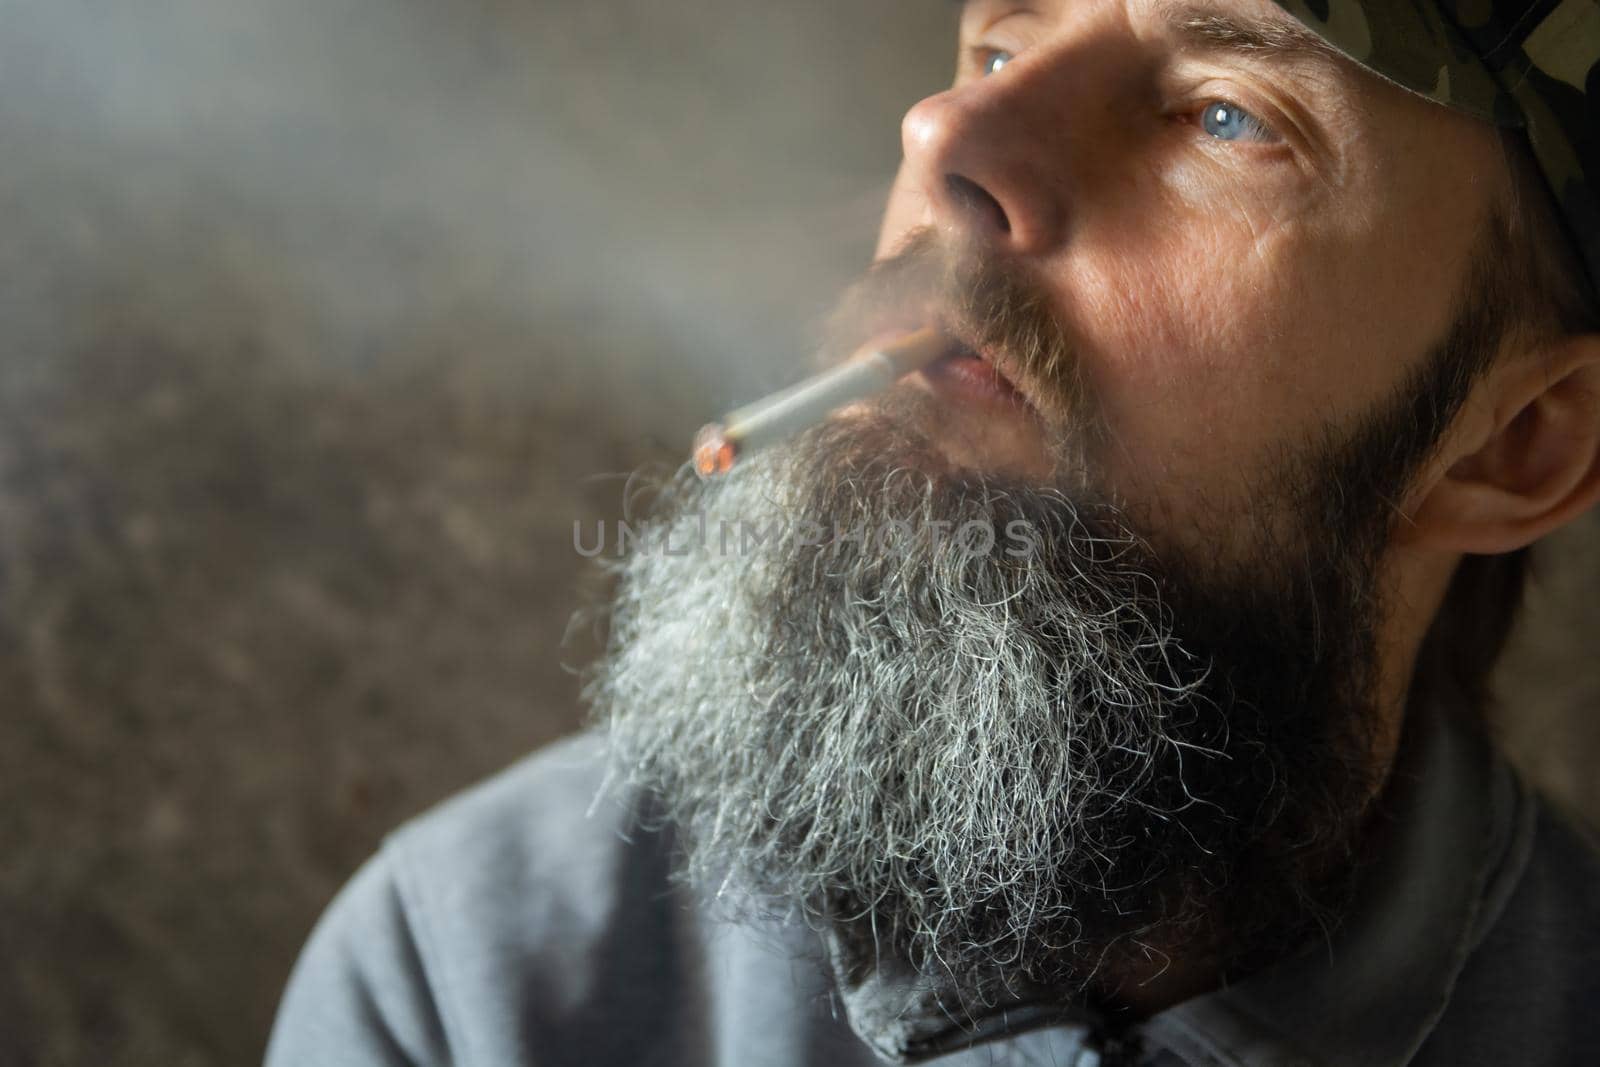 The man with the long beard is smoking a cigarette, portrait